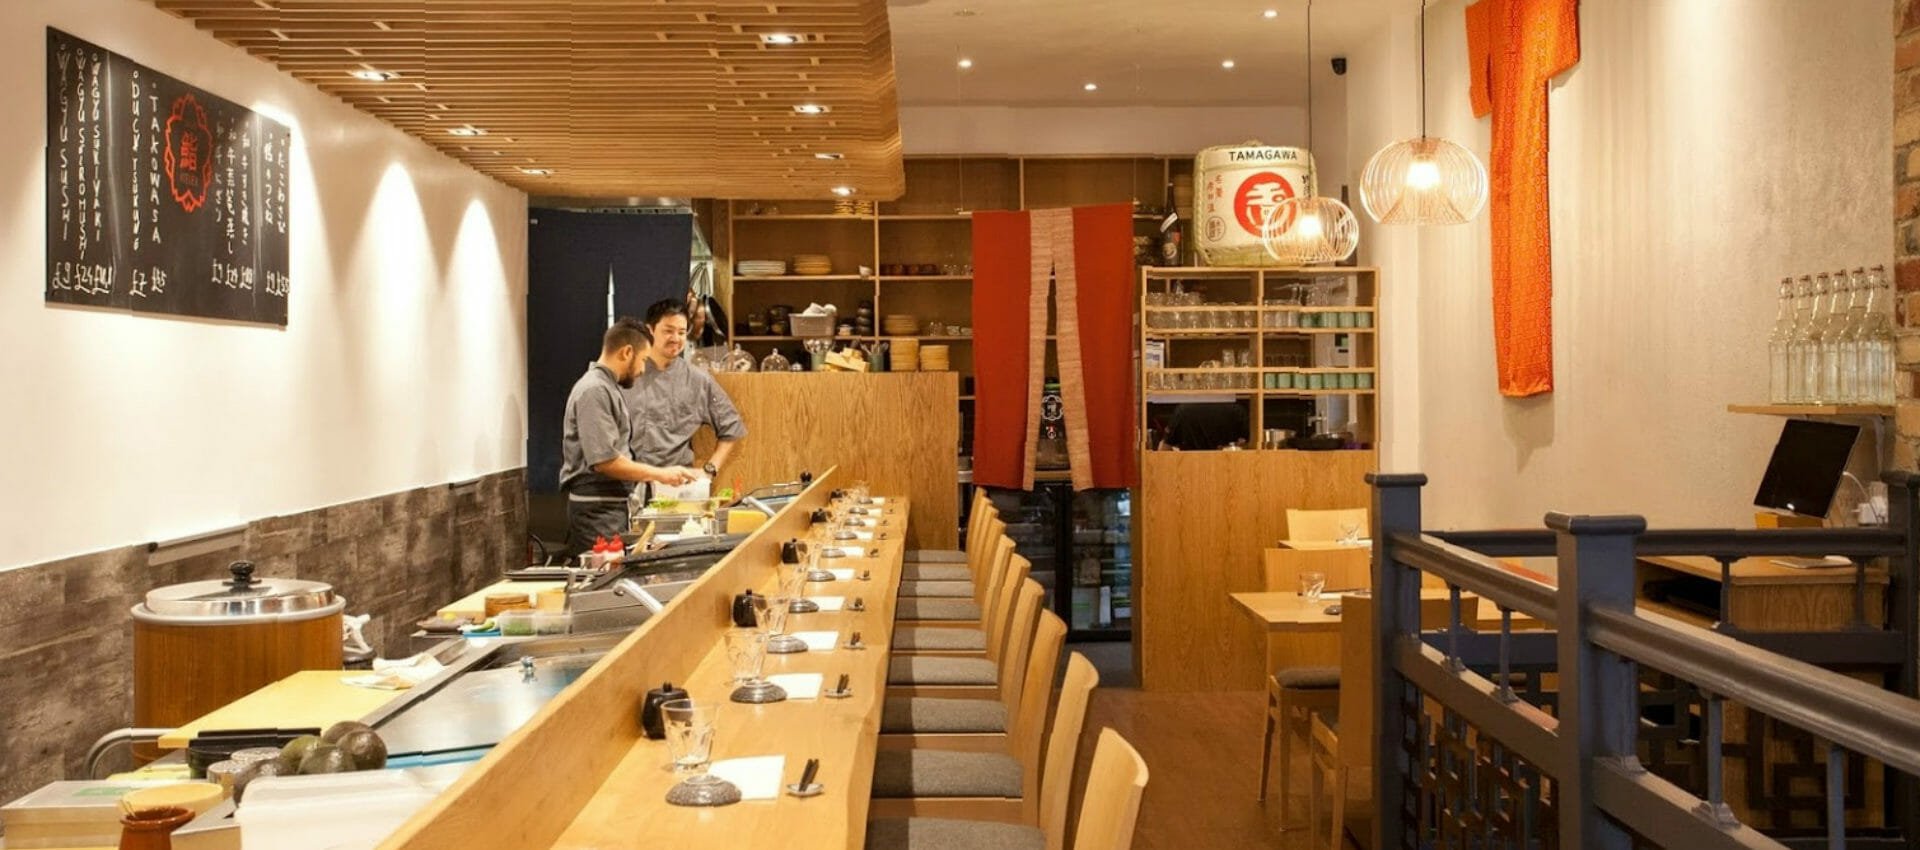 The Best Sushi Restaurants in London | The Nudge London